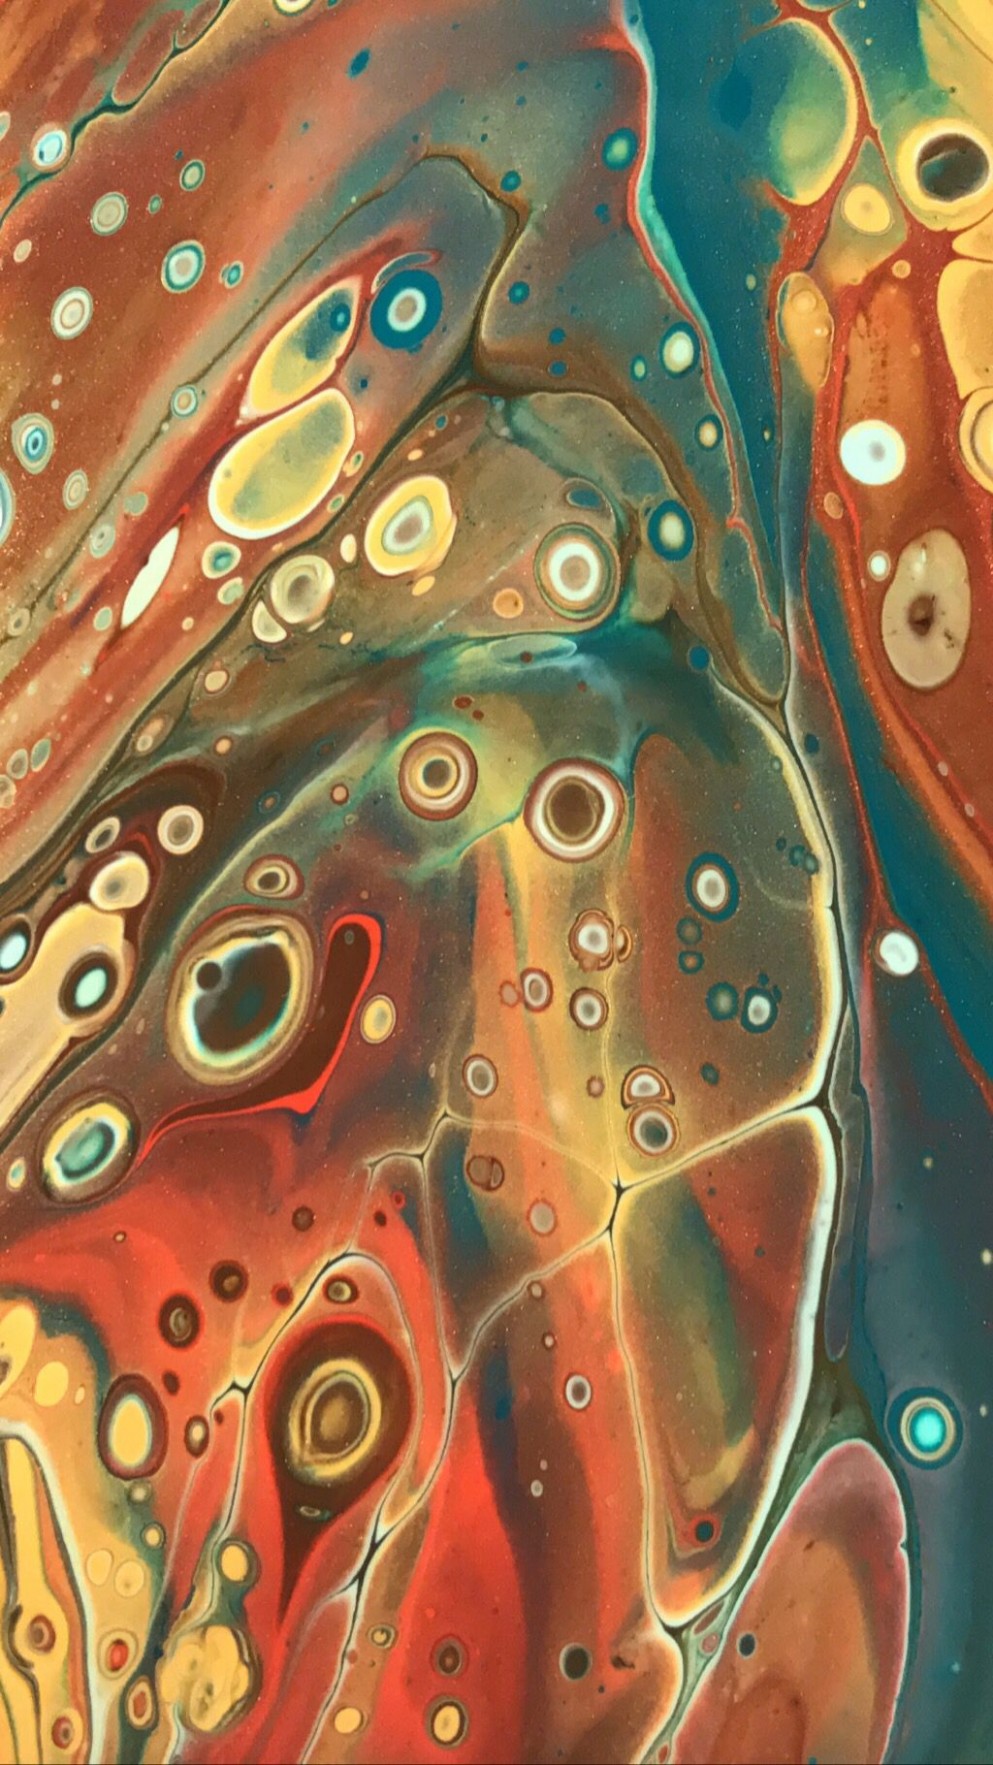 Fluid Art Wallpaper For@iphone | Acrylic Pouring Art, Art, Painting Acrylic Pour Painting Cl Near Me